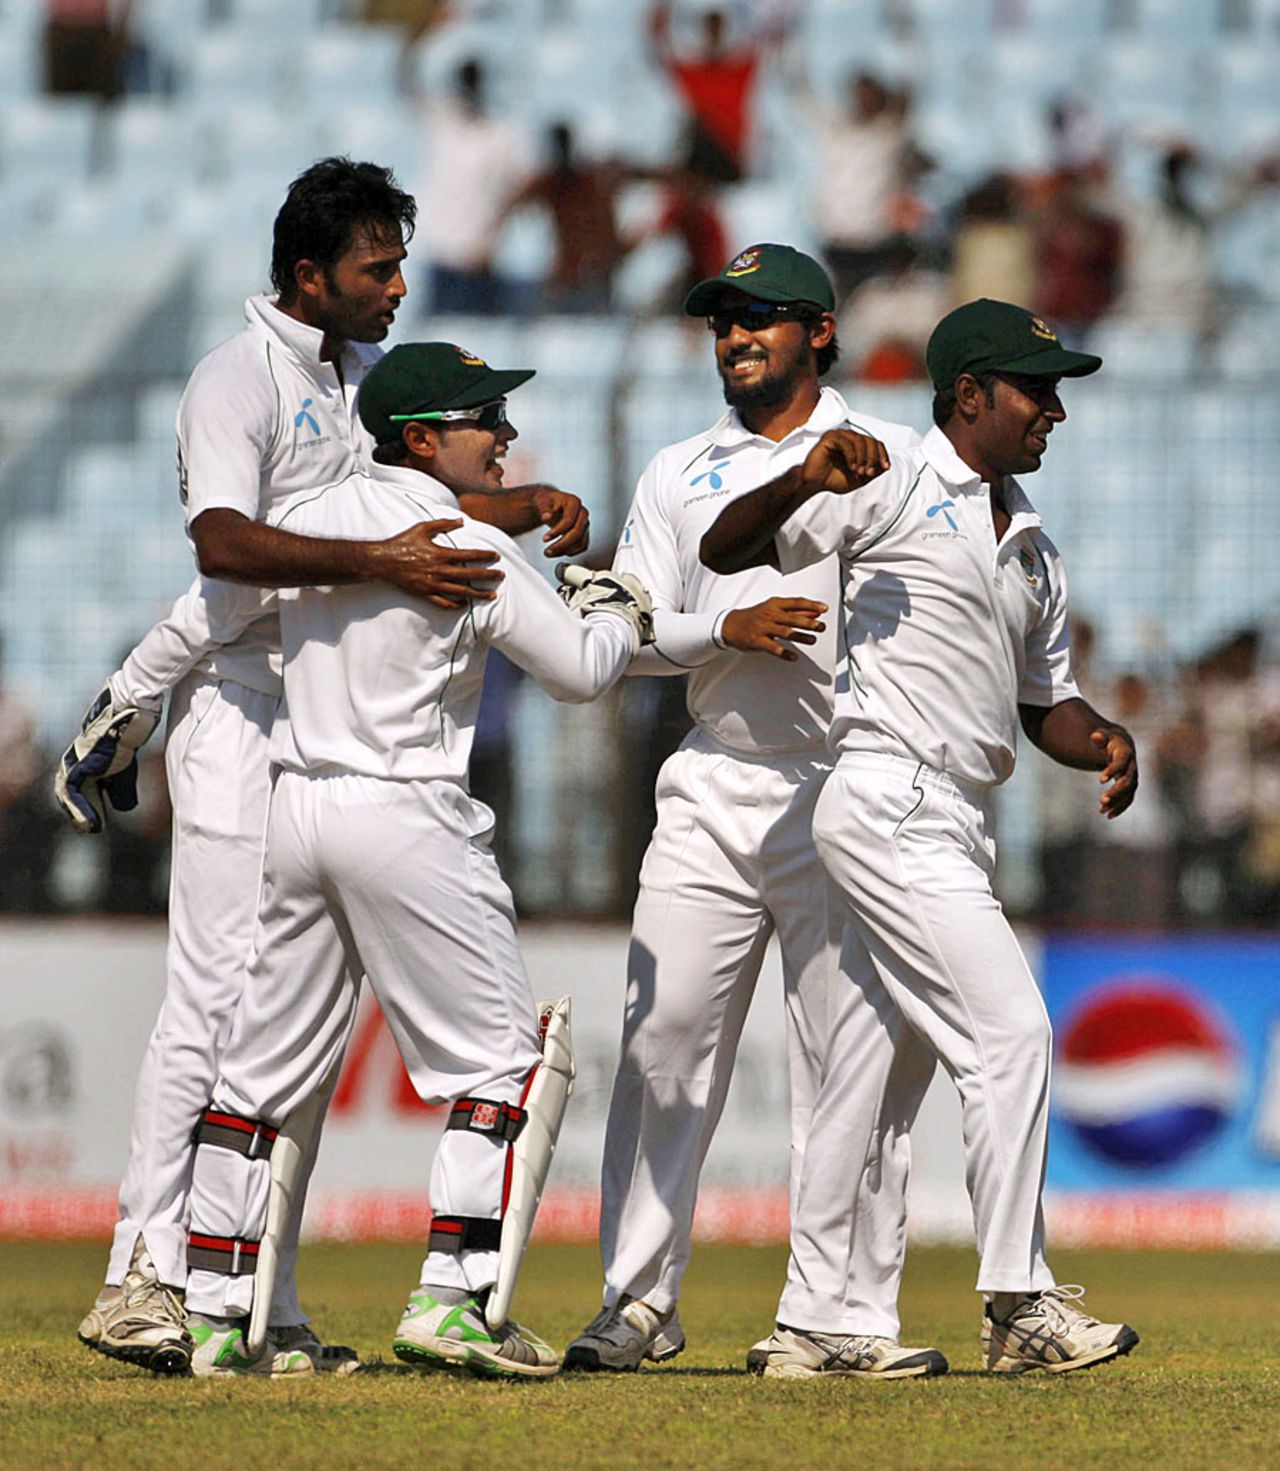 Shahadat Hossain celebrates a wicket with his team-mates, Bangladesh v West Indies, 1st Test, Chittagong, 4th day, October 24, 2011